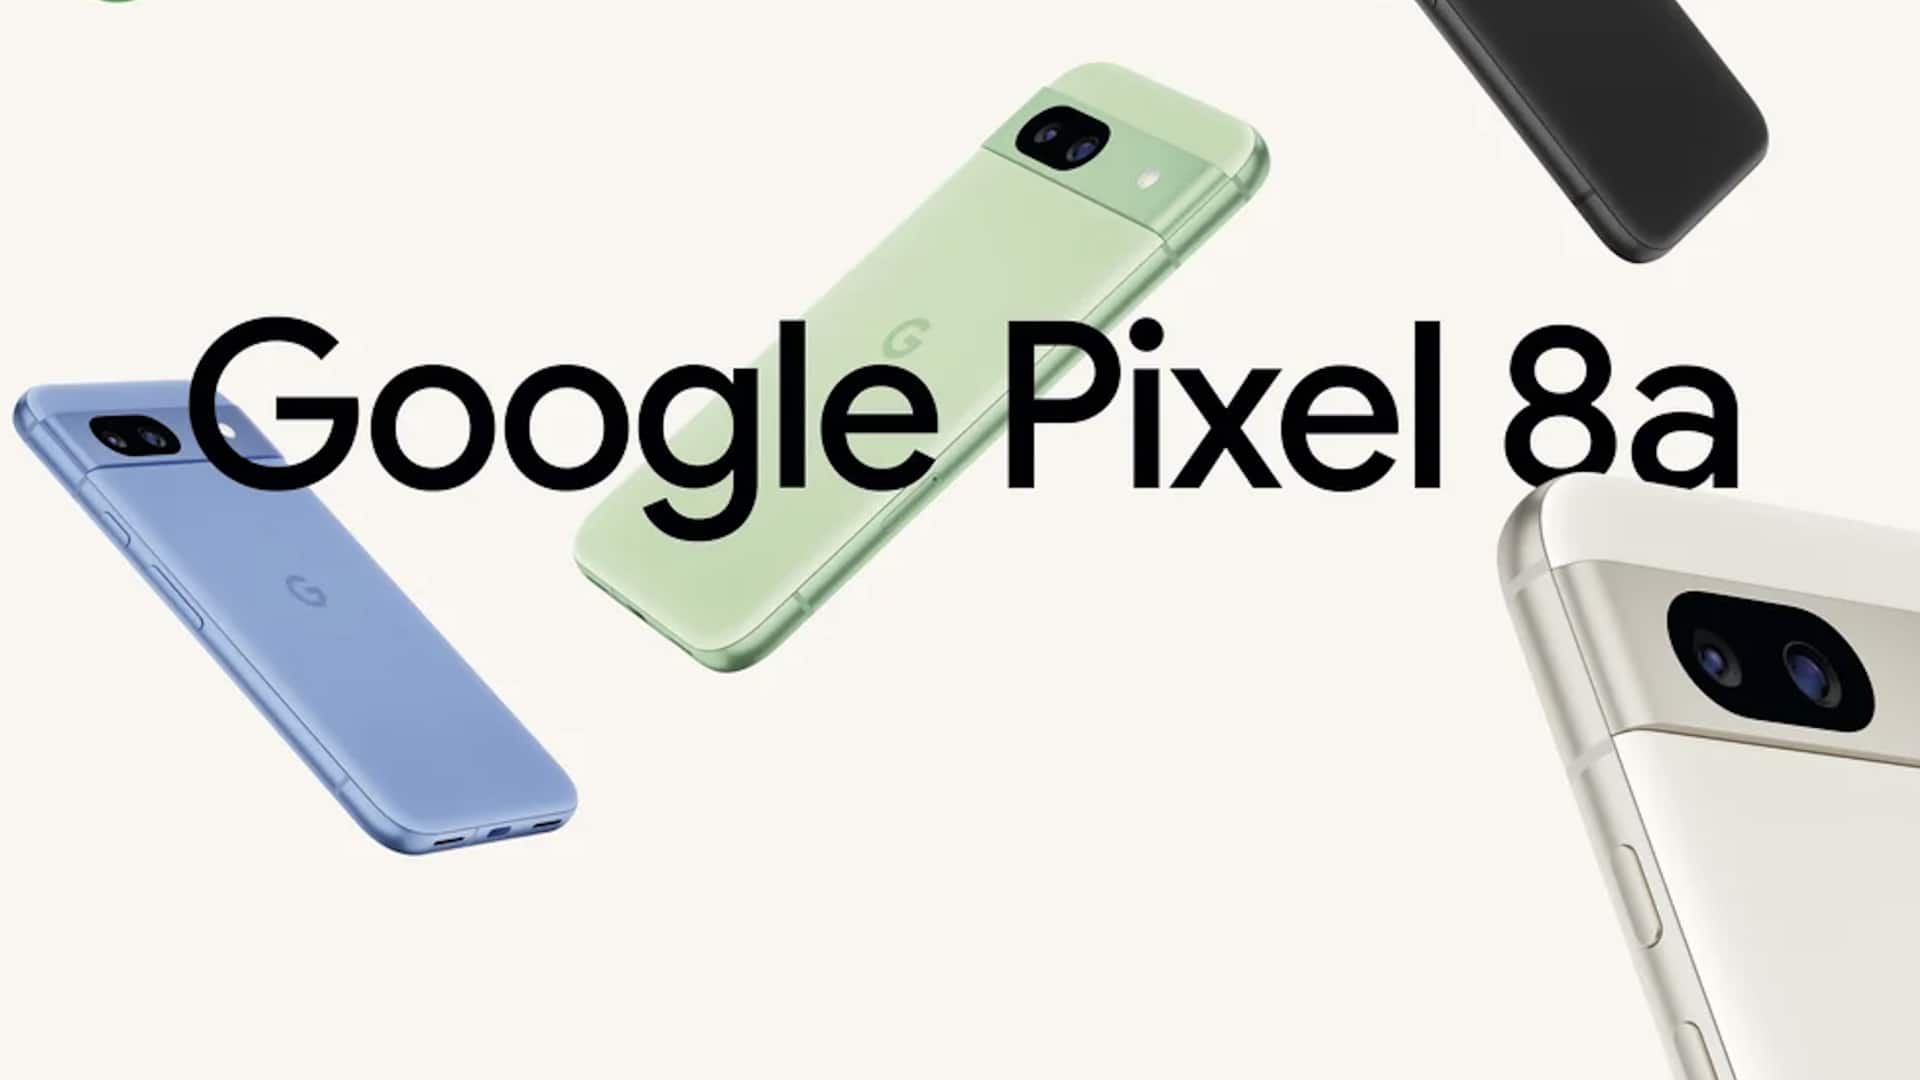 Google Pixel 8a, with AI-powered camera features, debuts at ₹53,000